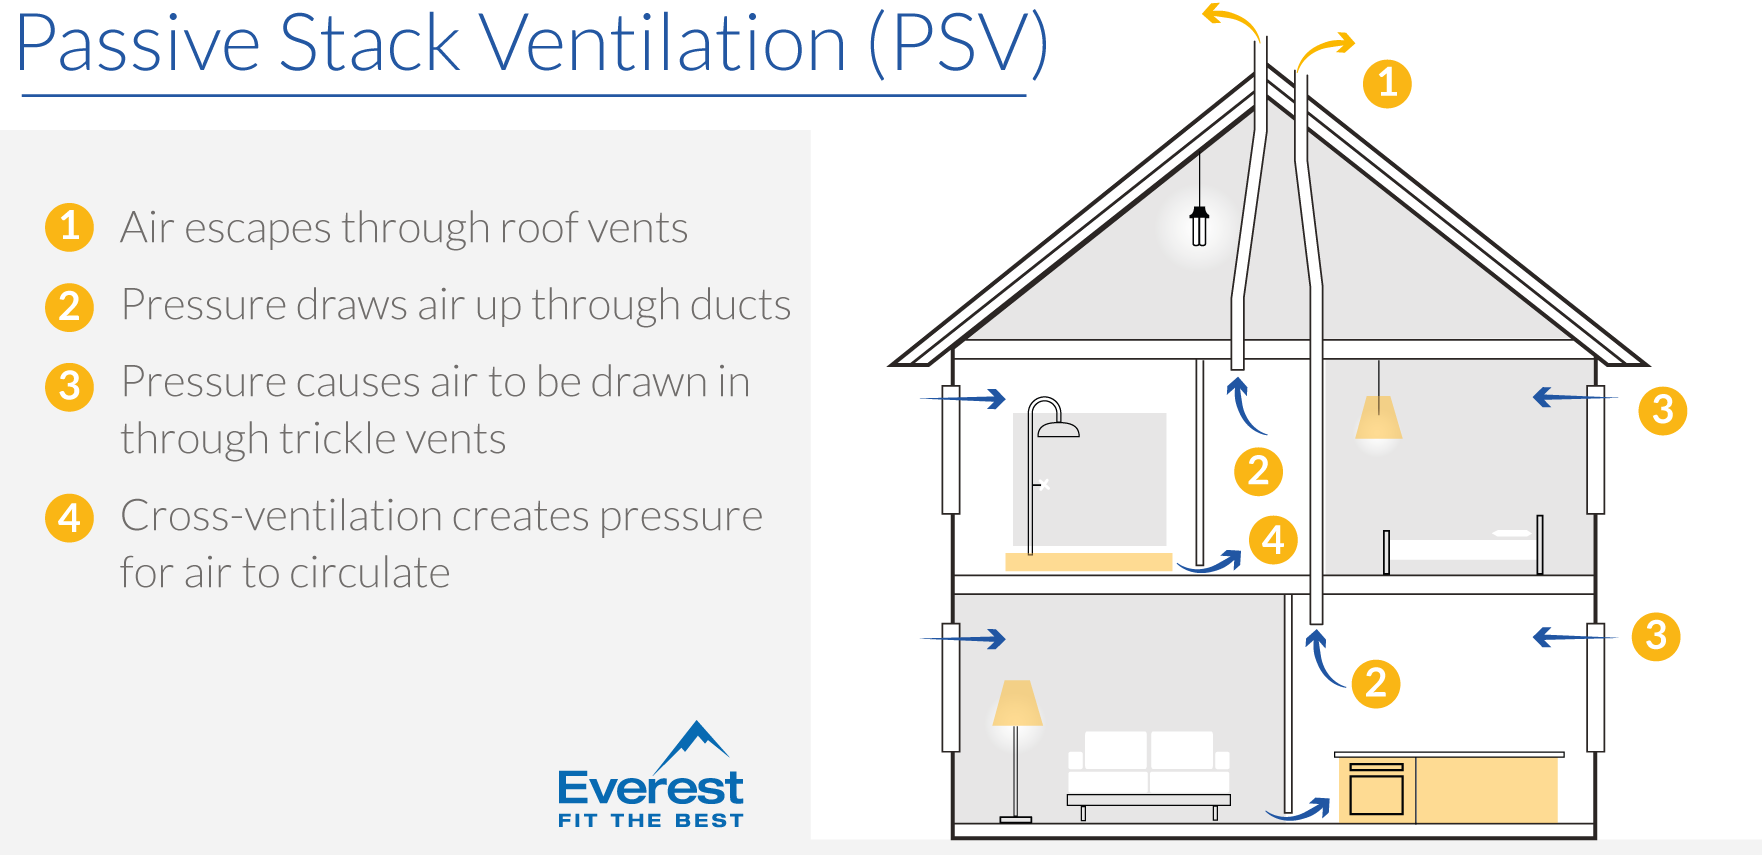 What is passive stack ventilation?